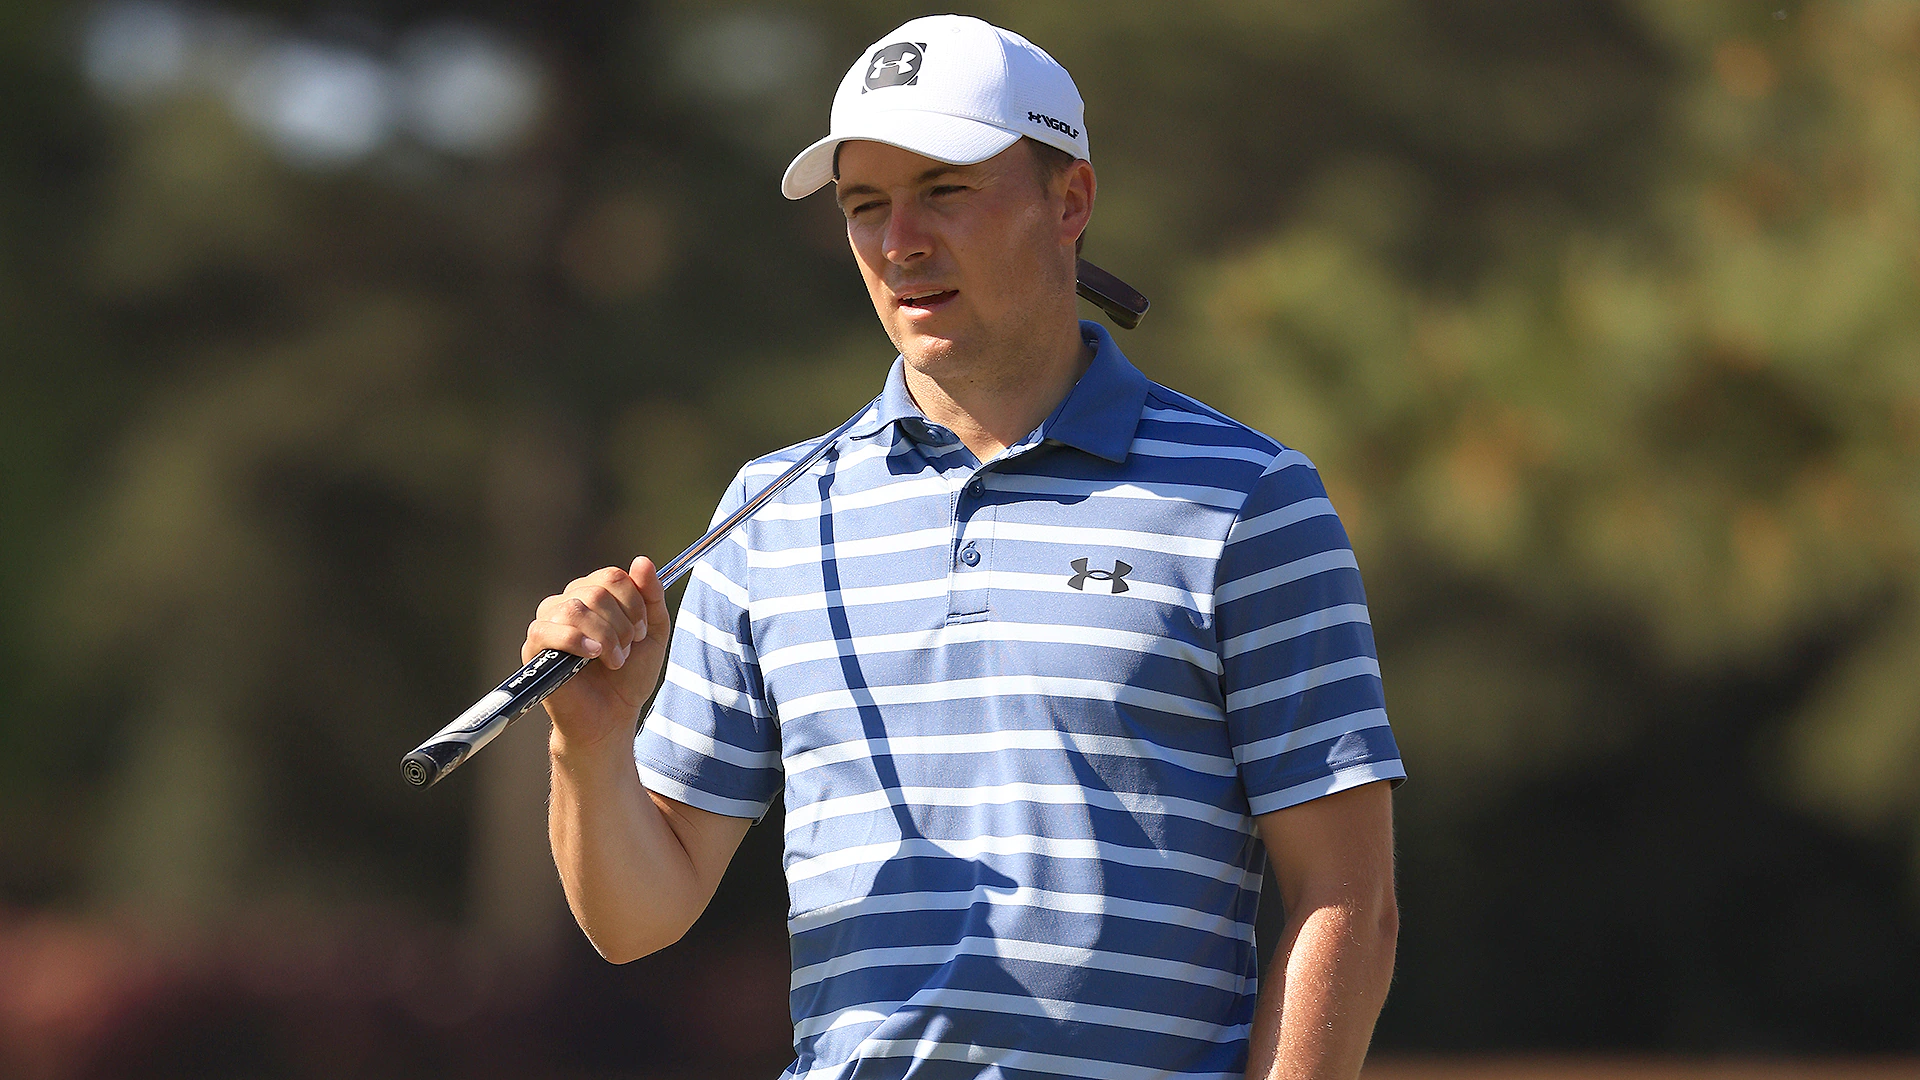 Coming off first win in nearly four years, there's still a 'next level' for Jordan Spieth 2